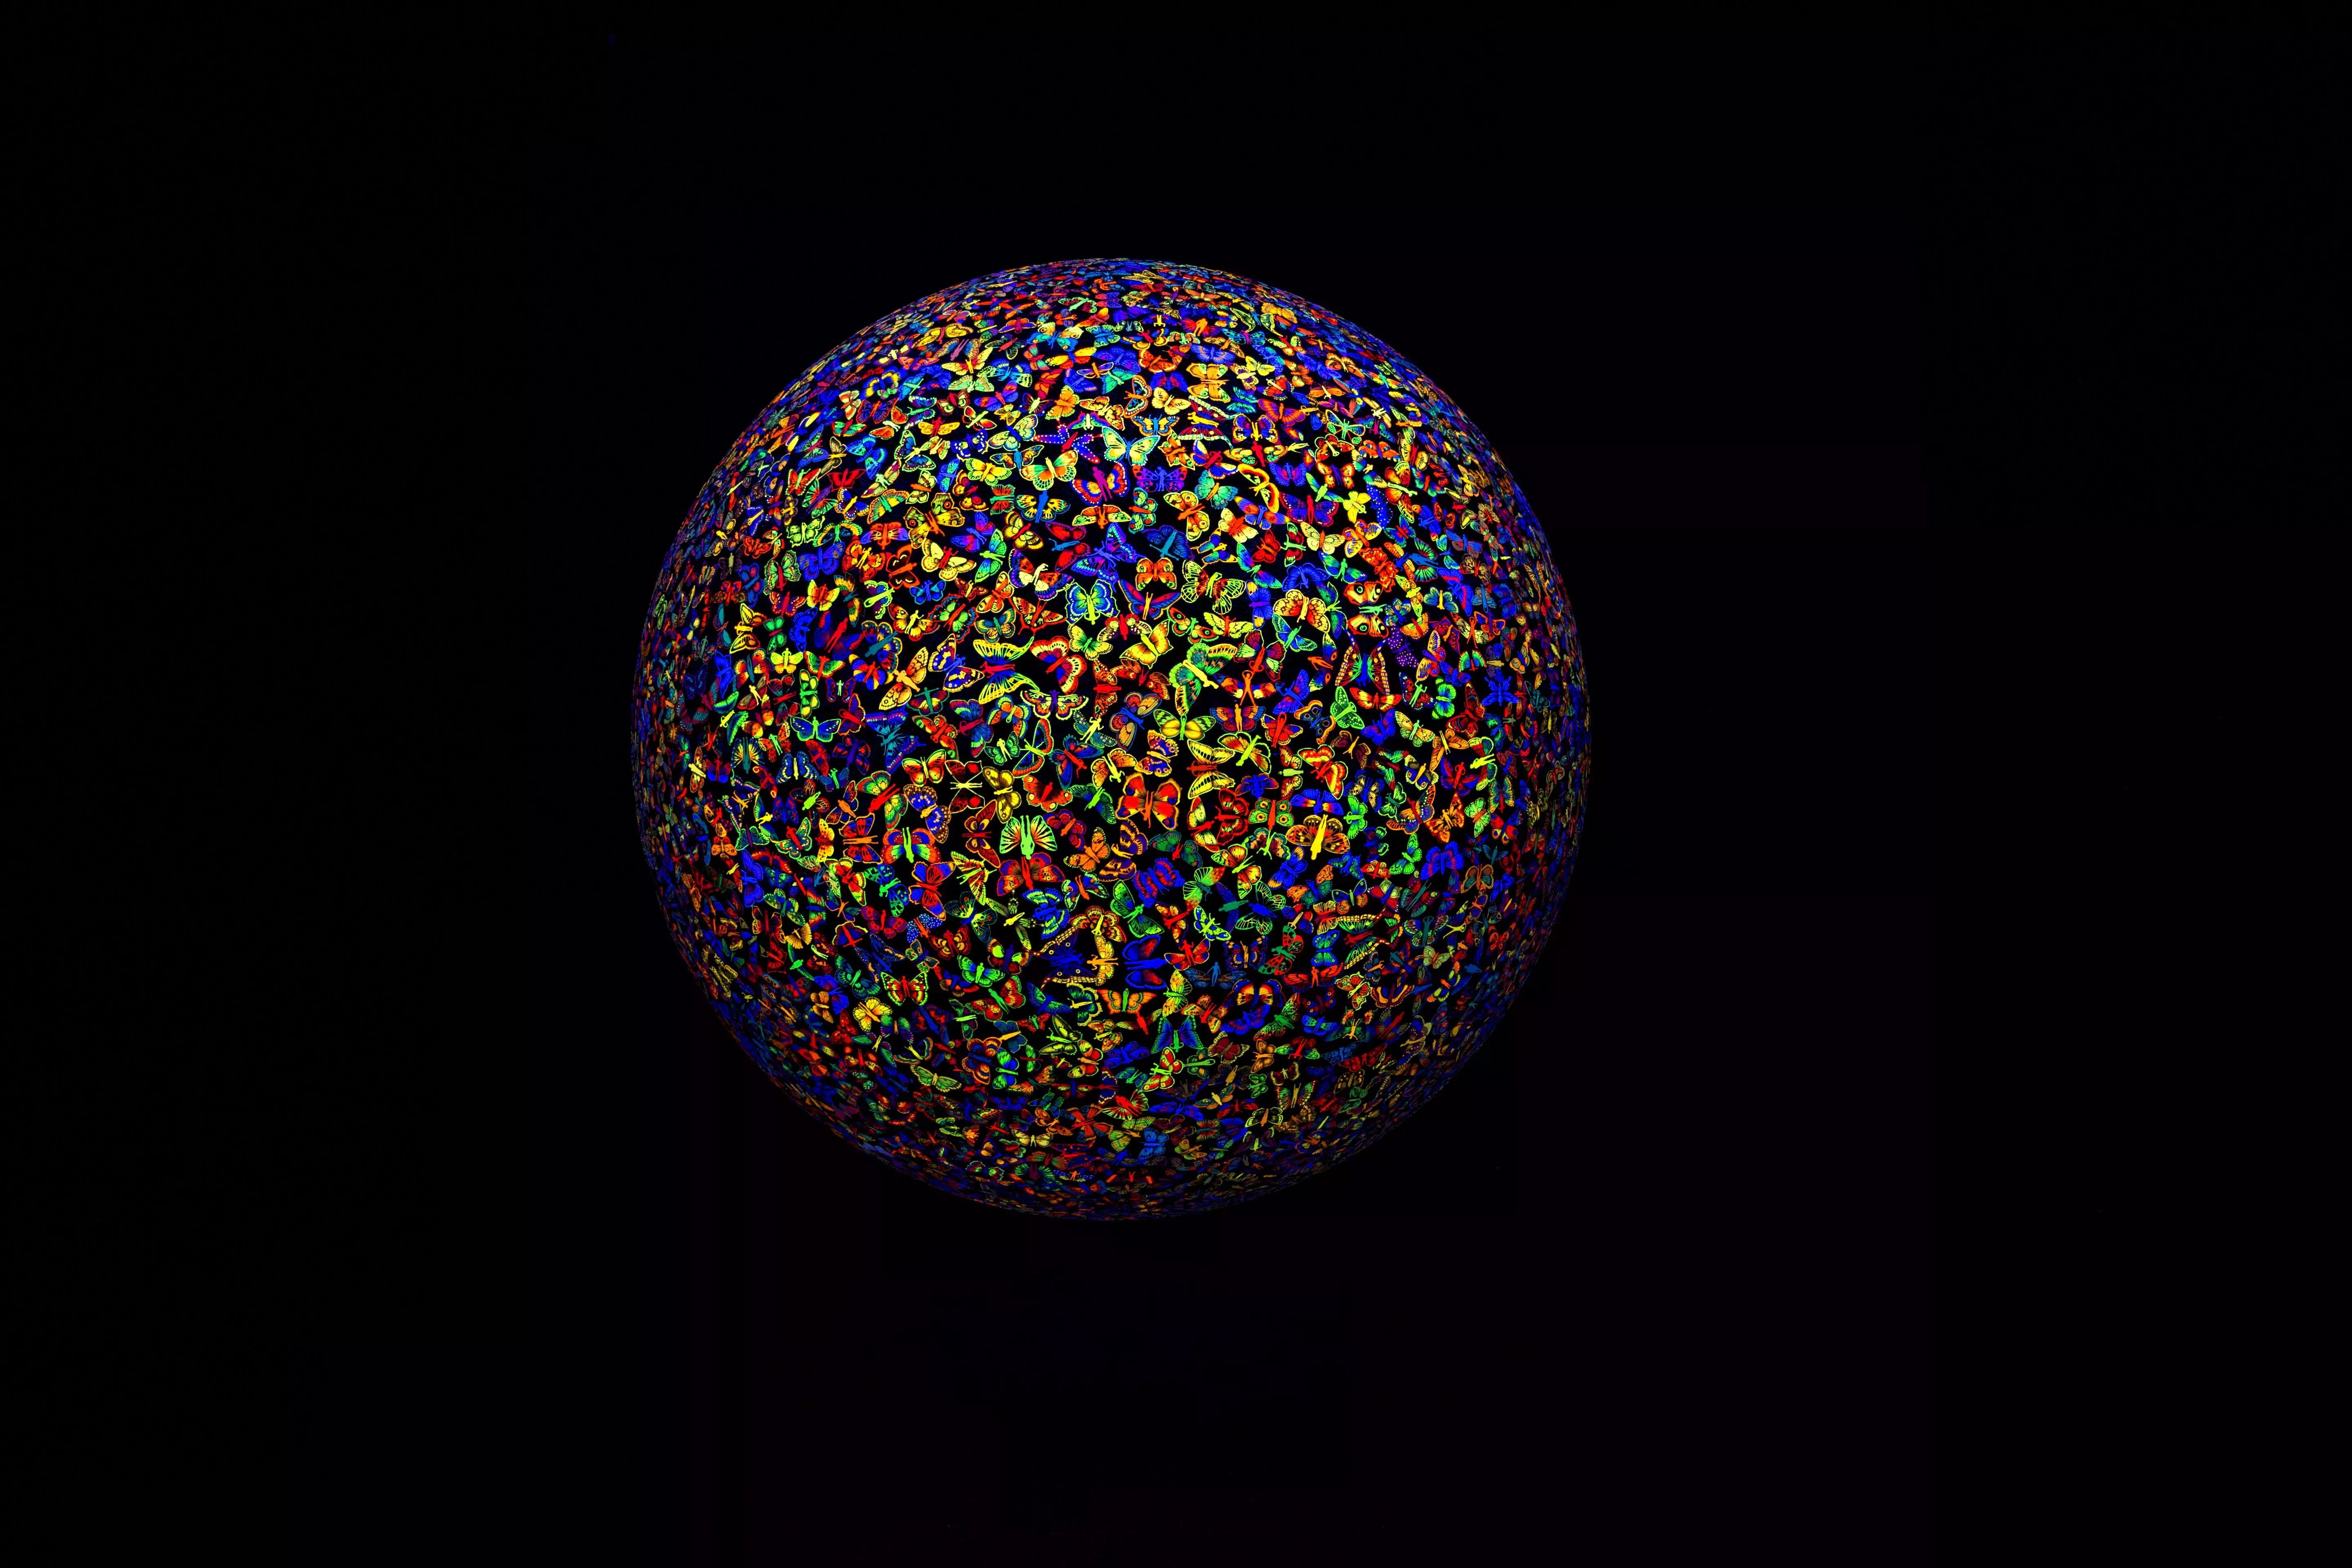 A disc of thousands of colourful insects suspended in darkness